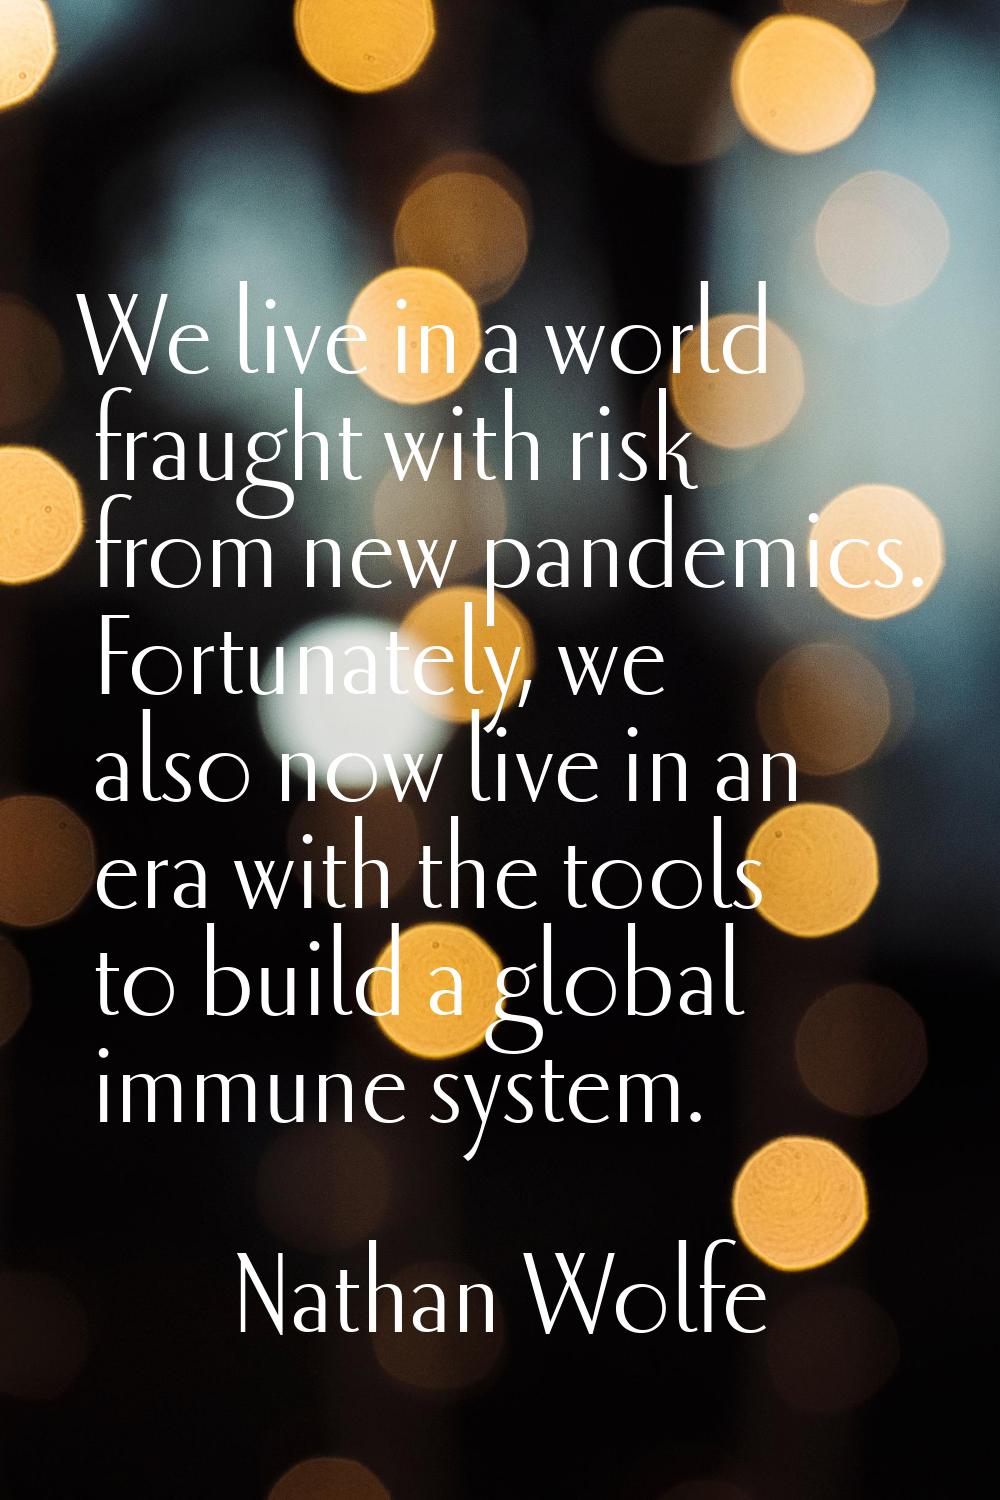 We live in a world fraught with risk from new pandemics. Fortunately, we also now live in an era wi